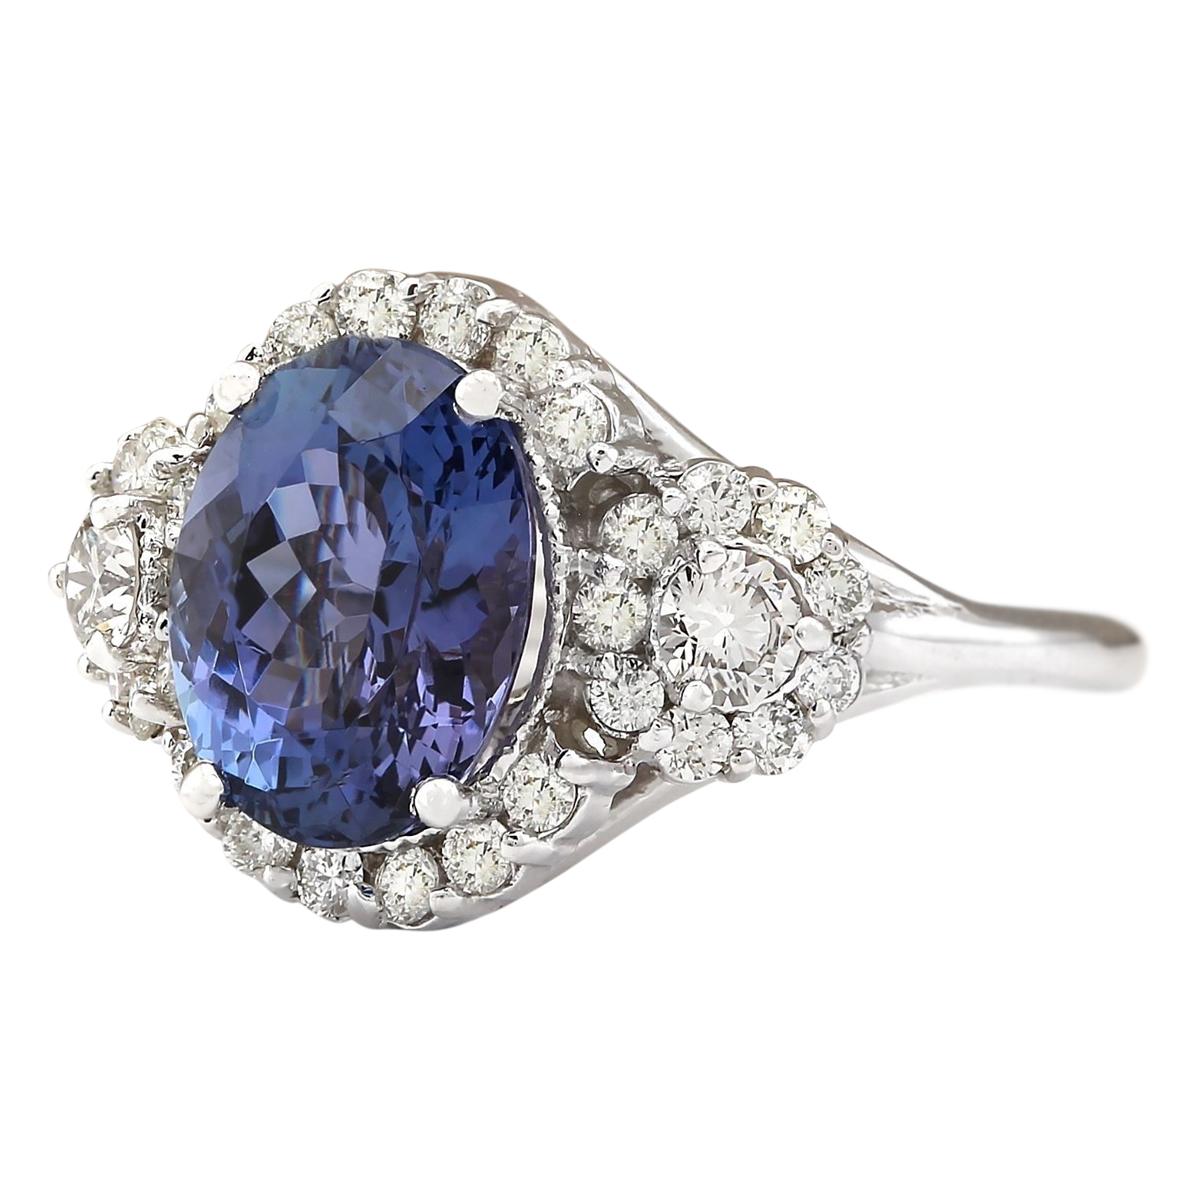 Stamped: 14K White Gold
Total Ring Weight: 6.5 Grams
Total Natural Tanzanite Weight is 4.32 Carat (Measures: 11.00x9.00 mm)
Color: Blue
Total Natural Diamond Weight is 1.00 Carat
Color: F-G, Clarity: VS2-SI1
Face Measures: 14.60x19.90 mm
Sku: